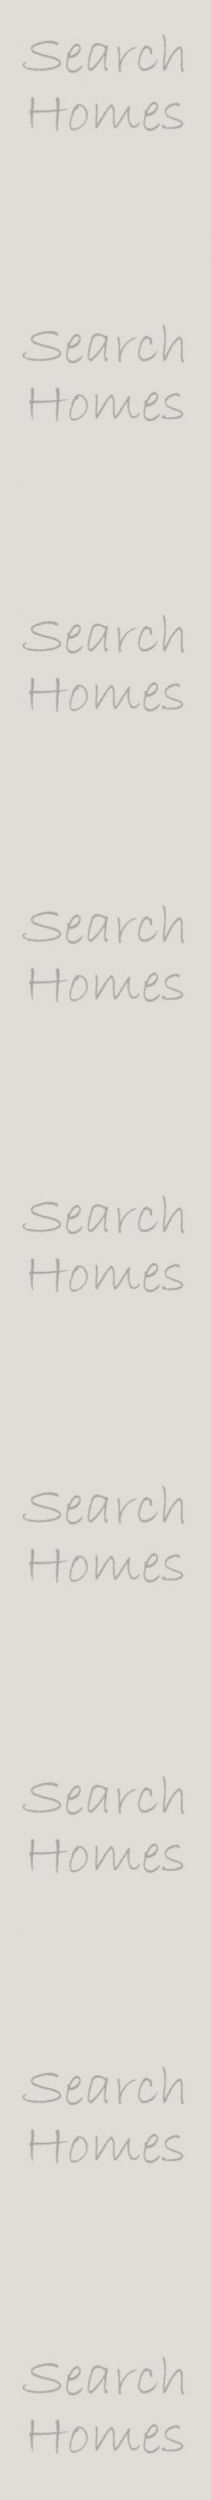 search_homes_mls